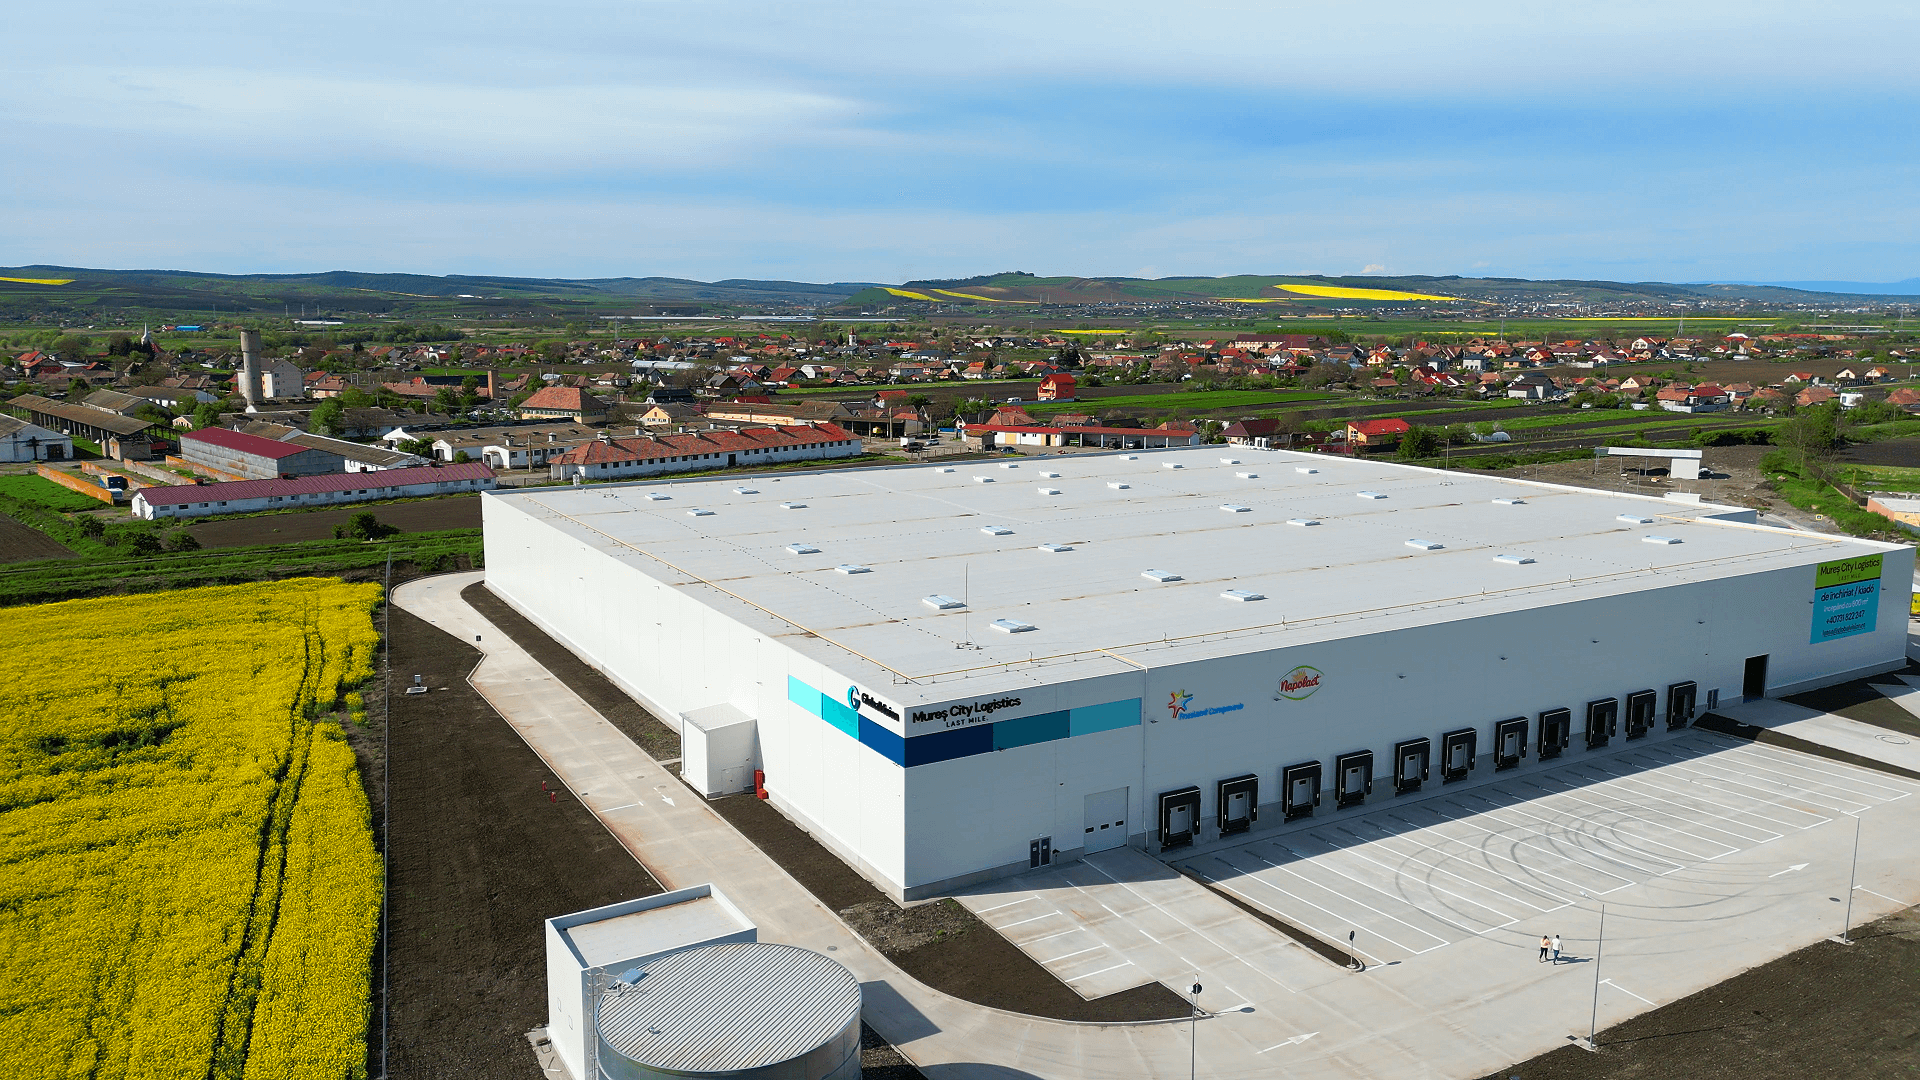 FrieslandCampina inaugurated the logistics center in Mureș, in partnership with Global Vision and Globalworth